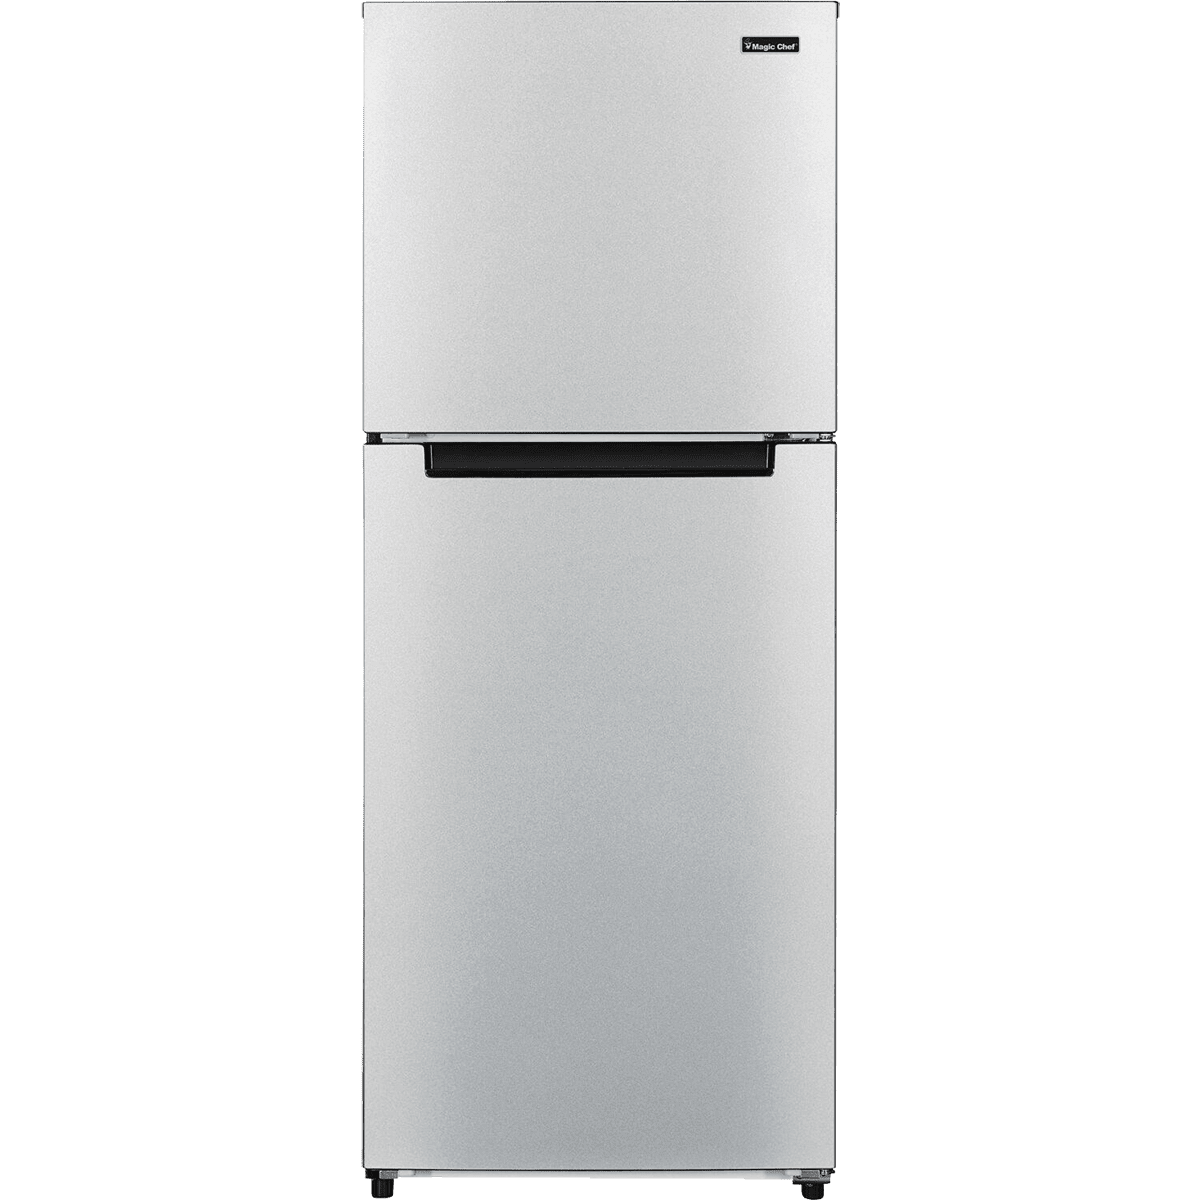 Magic Chef 10.1 Cu. Ft. Energy Star Refrigerator with Top-Mount Freezer